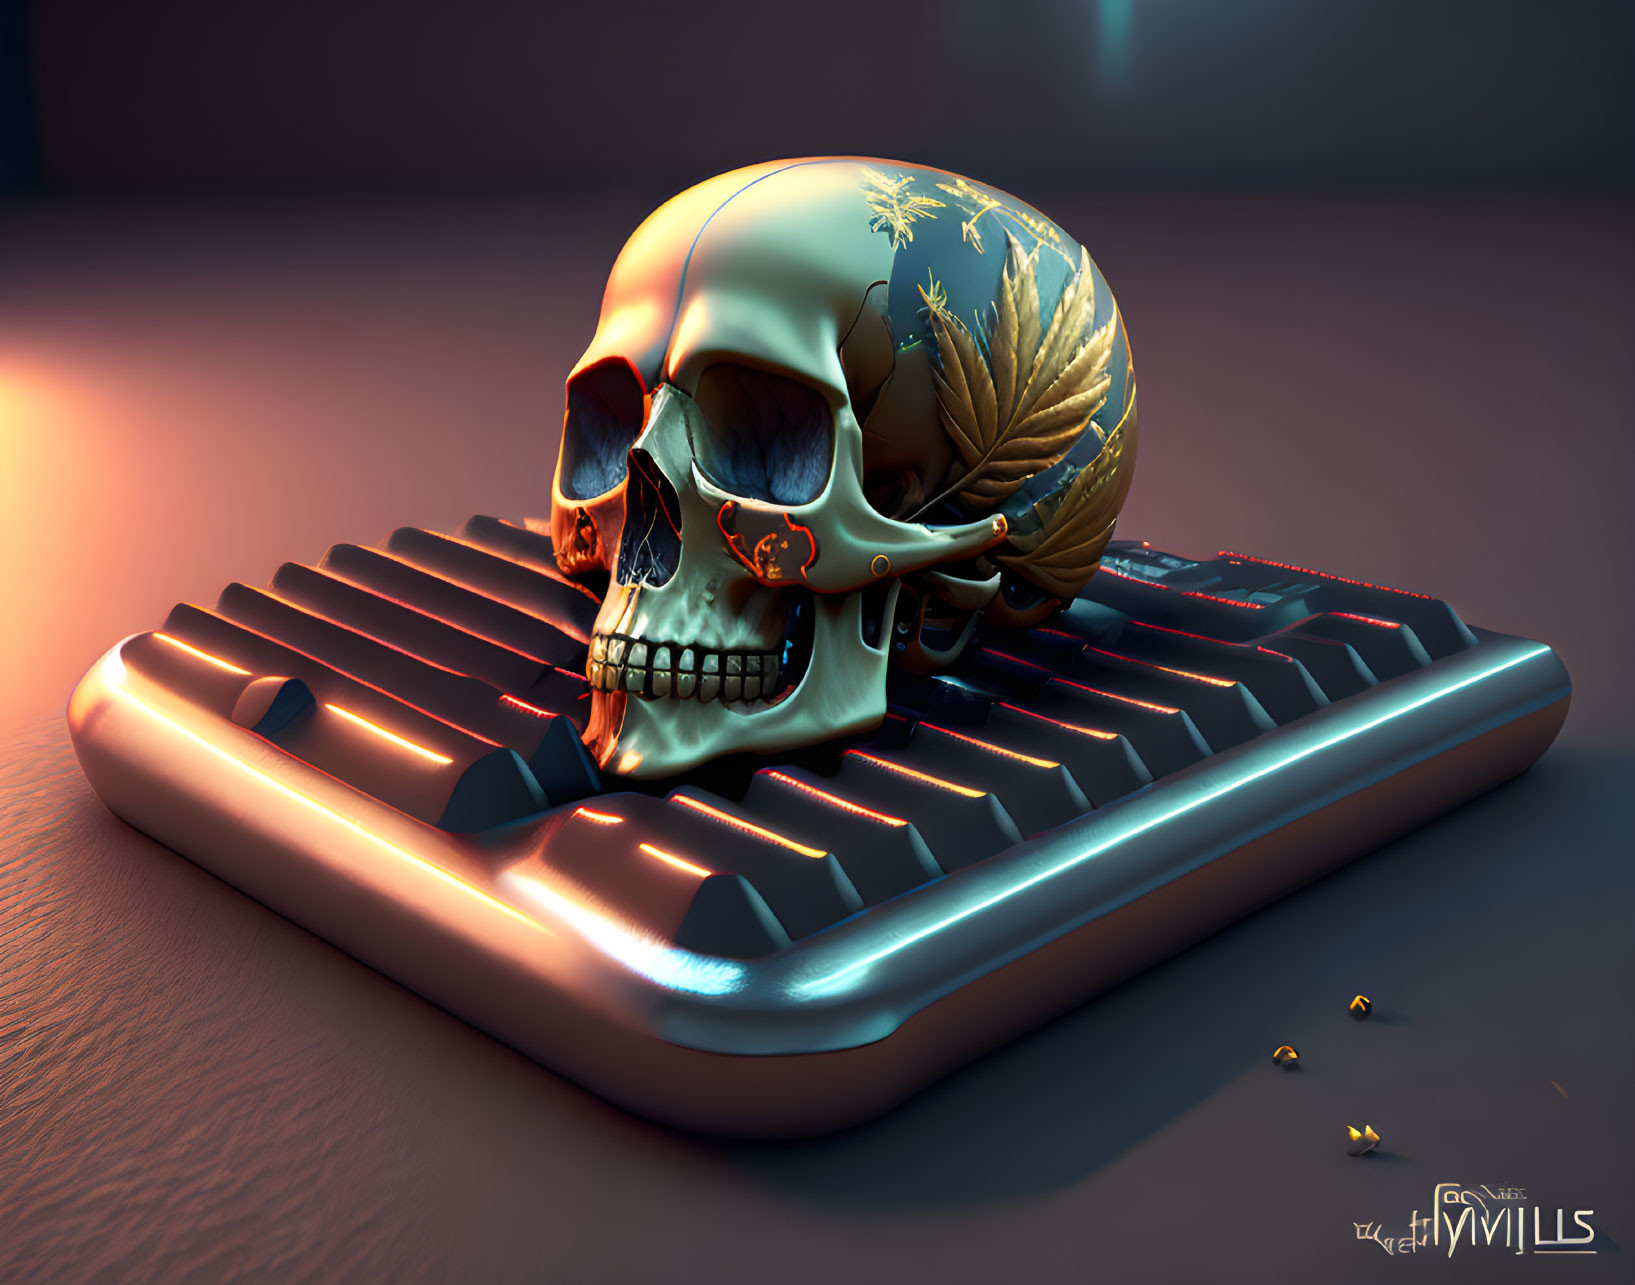 Golden-decorated skull on illuminated keyboard with scattered leaves in warm light